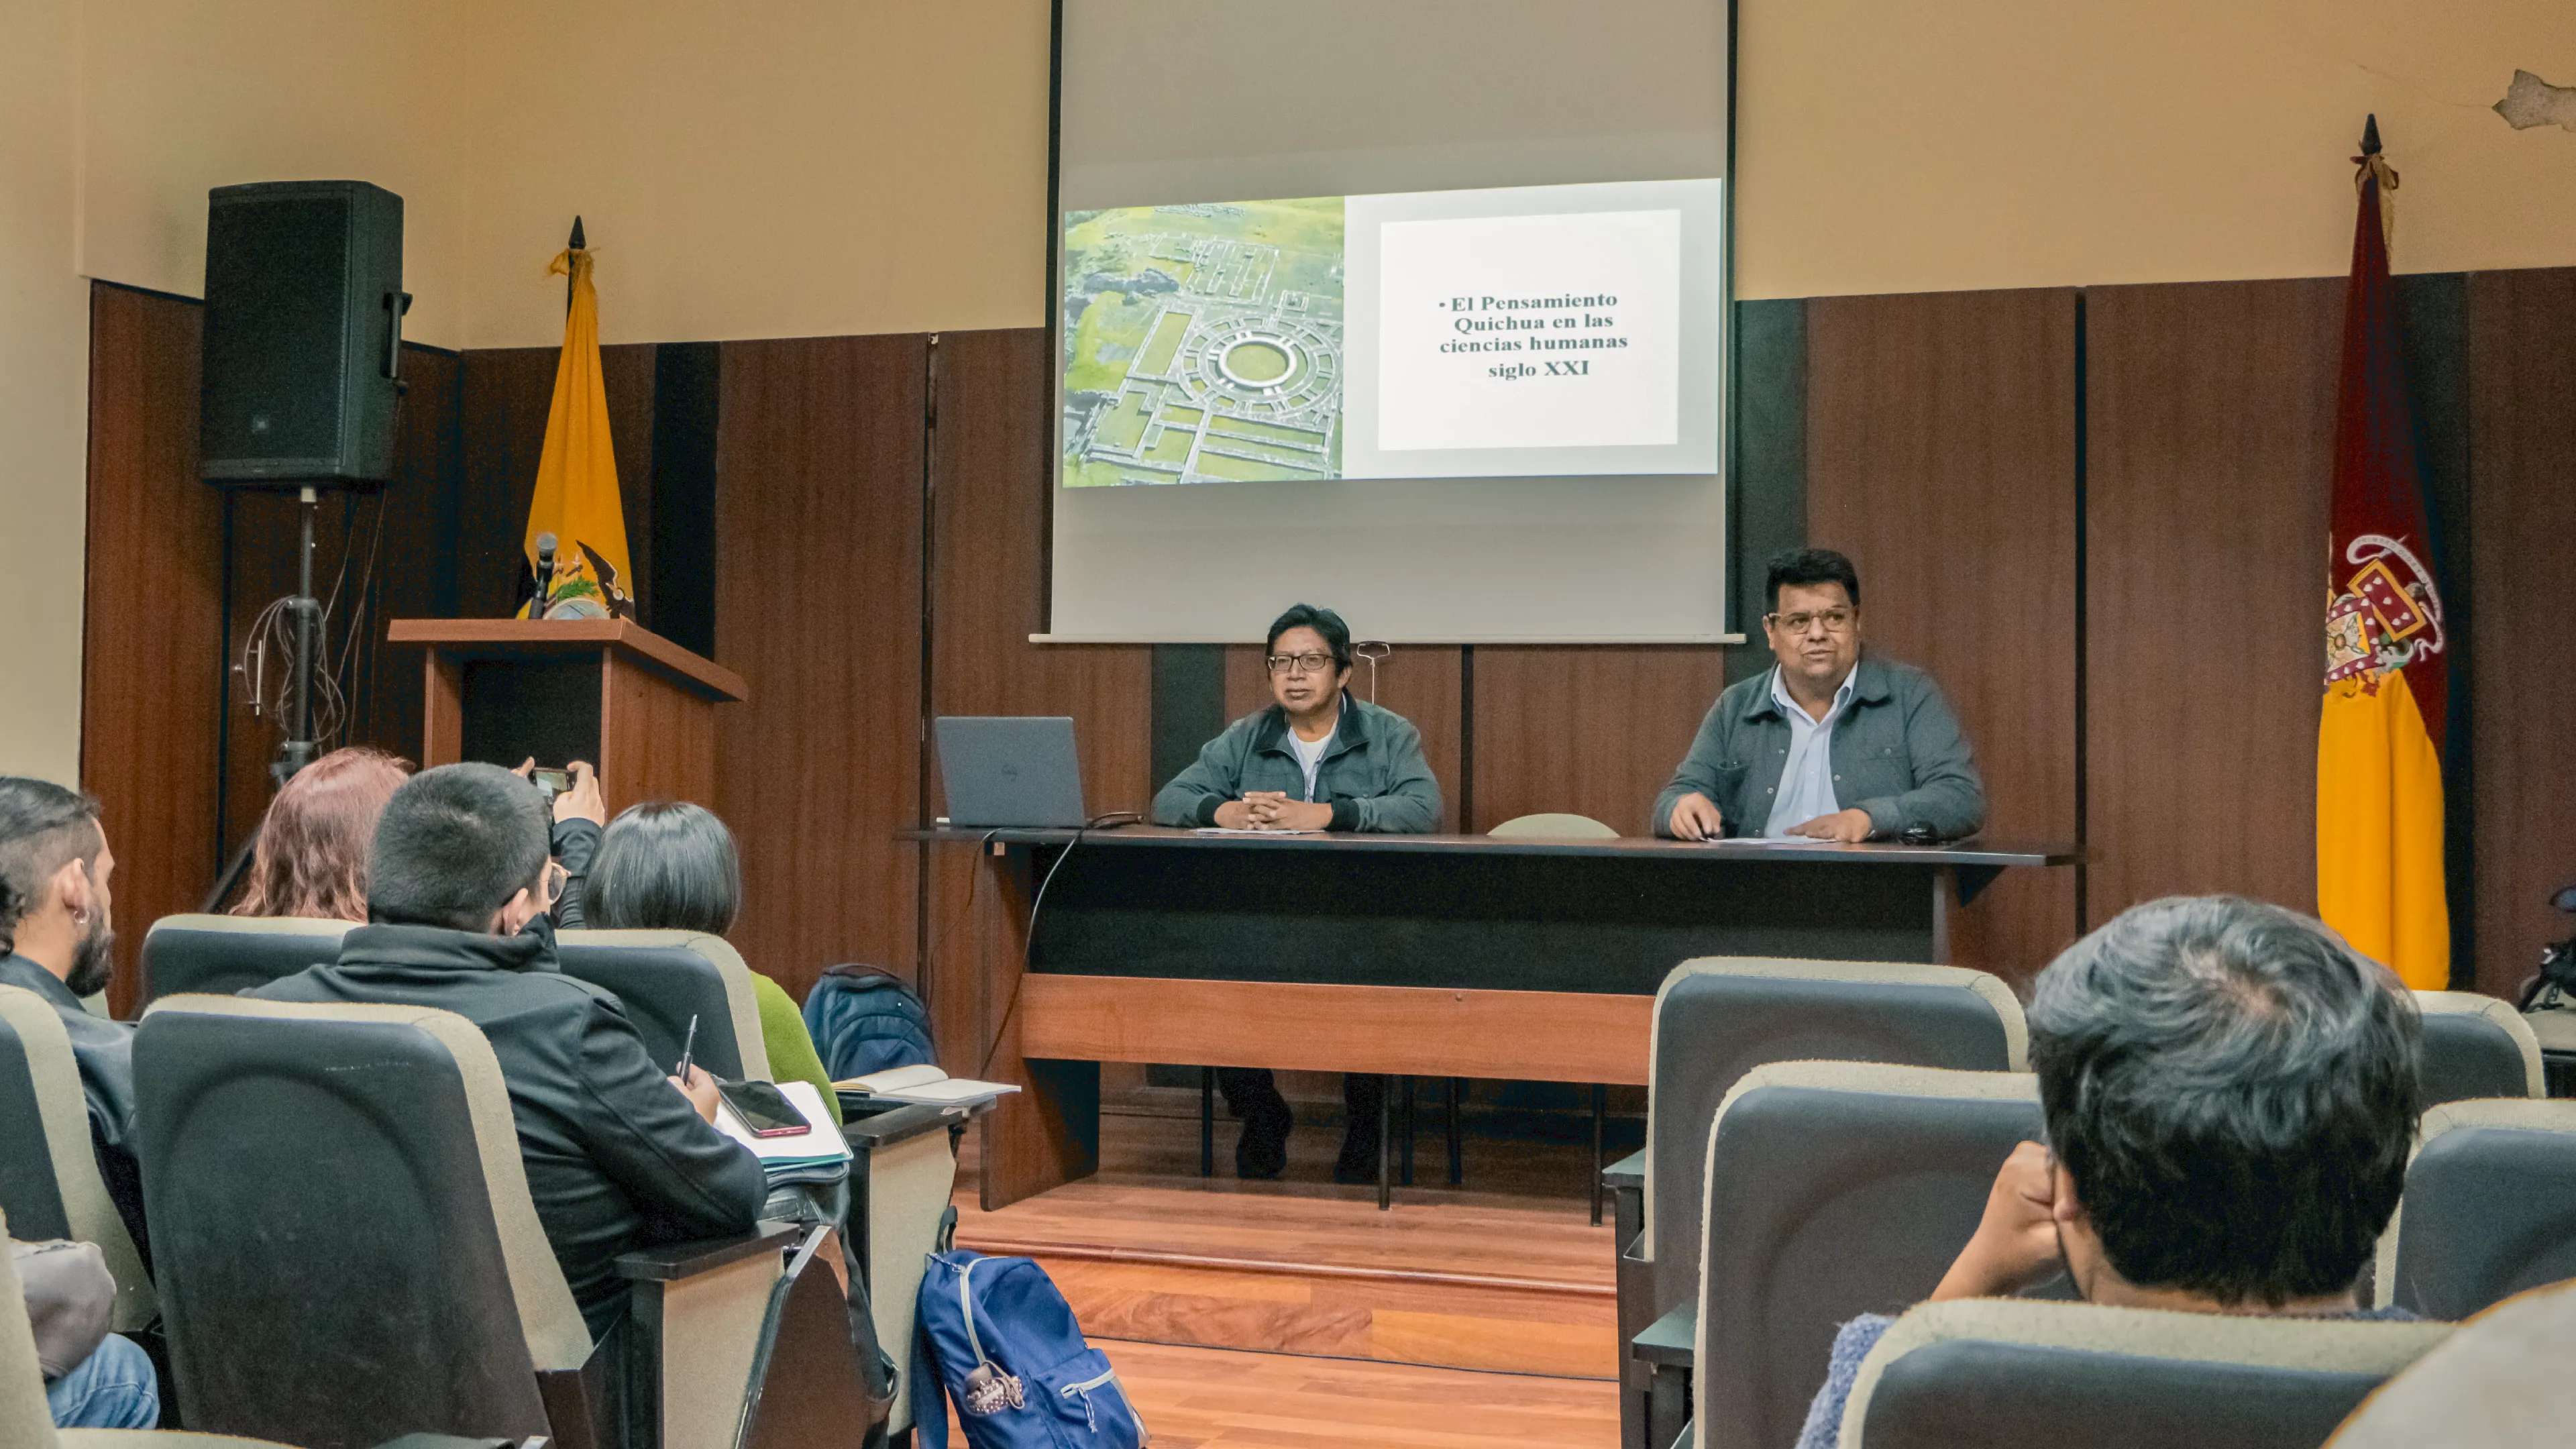 Quichua thought in the field of Human Sciences; a talk given by Fabián Potosí